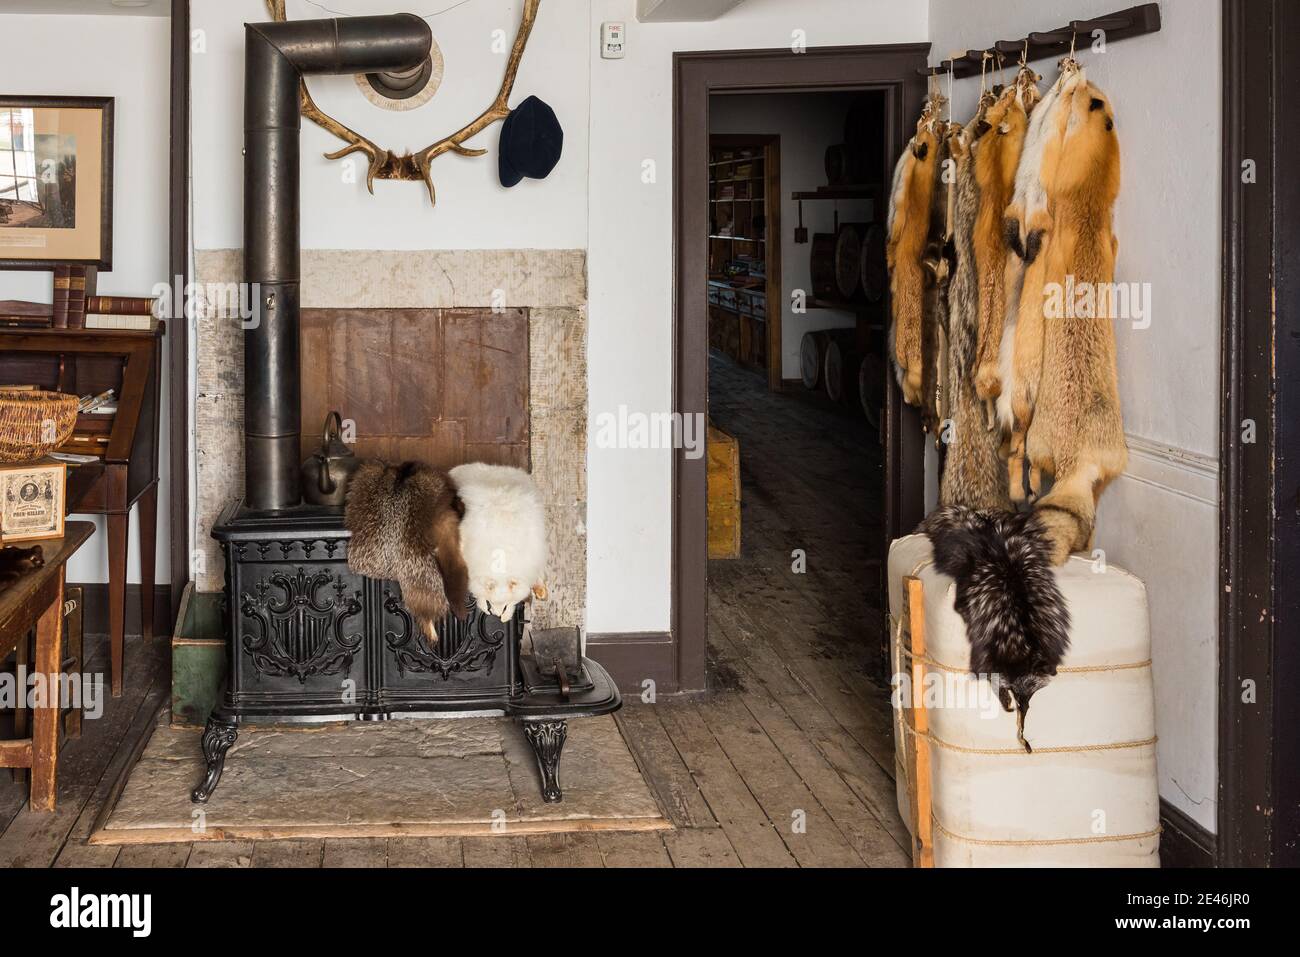 Building interiors of the Lower Fort Garry National Historic Site established in 1831 the by the Hudson Bay Company. Stock Photo